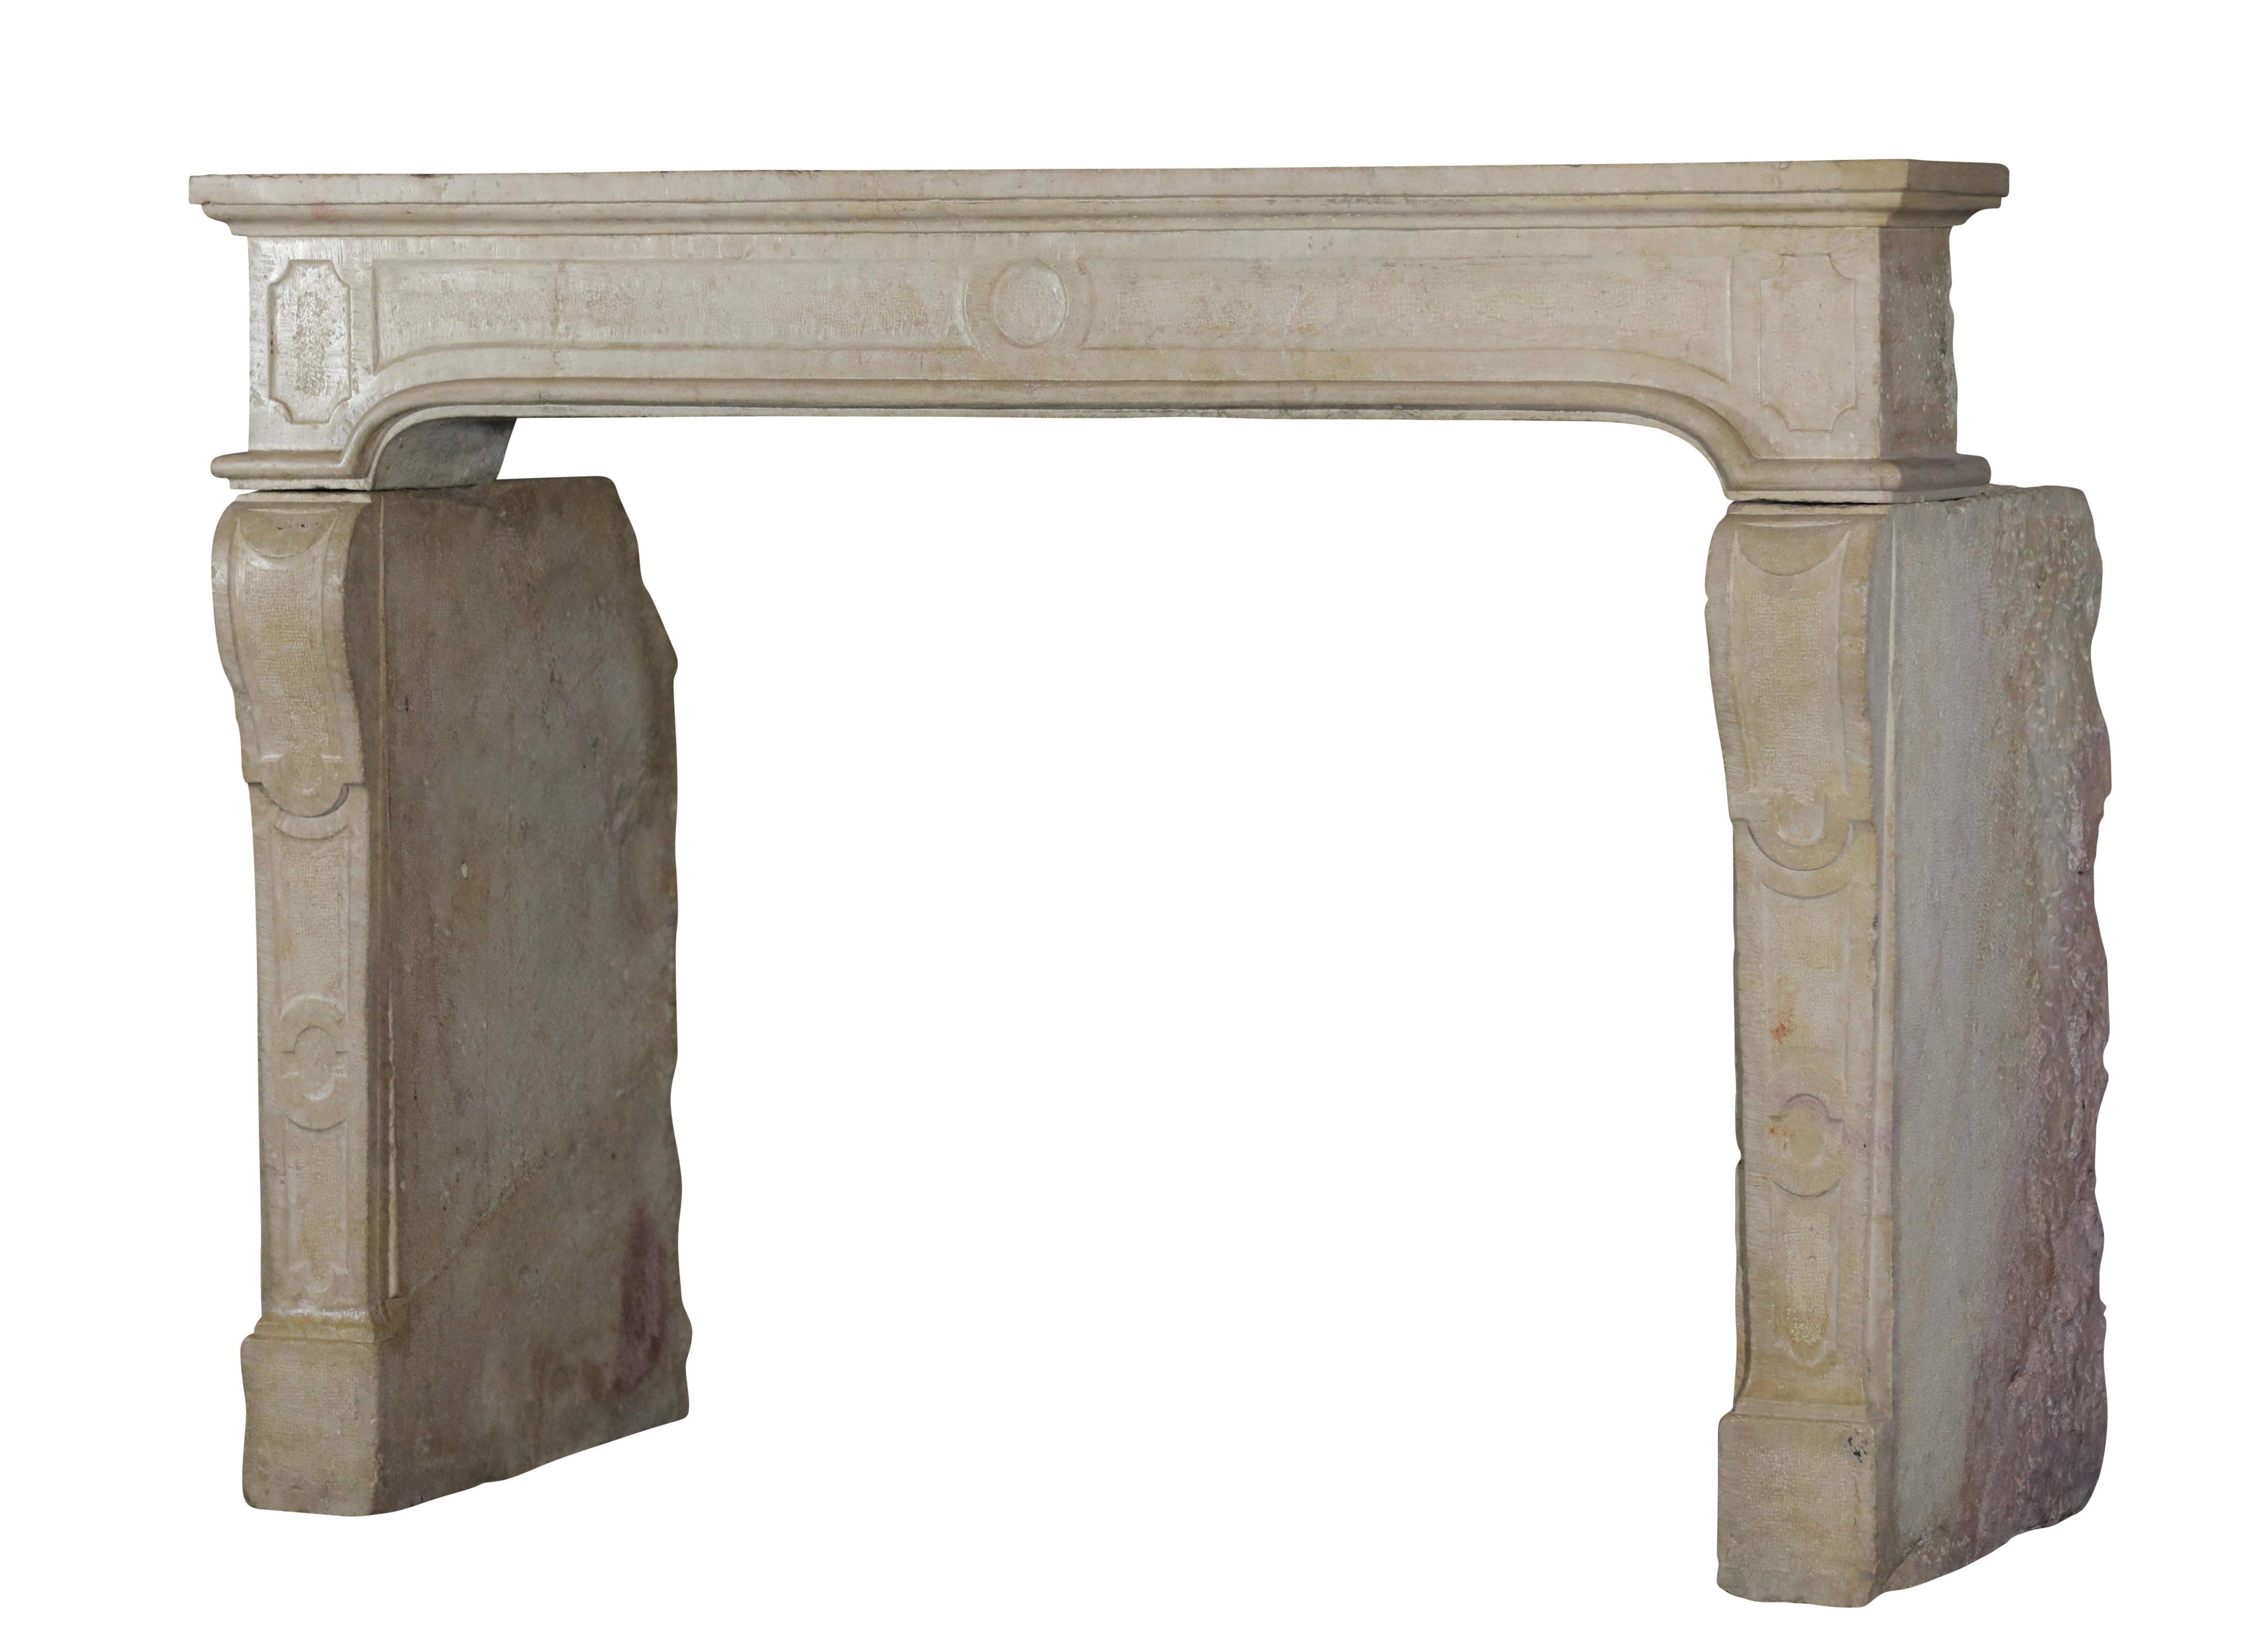 Louis XIV Strong French Beige Hard Limestone Decorative Small Fireplace Surround For Sale